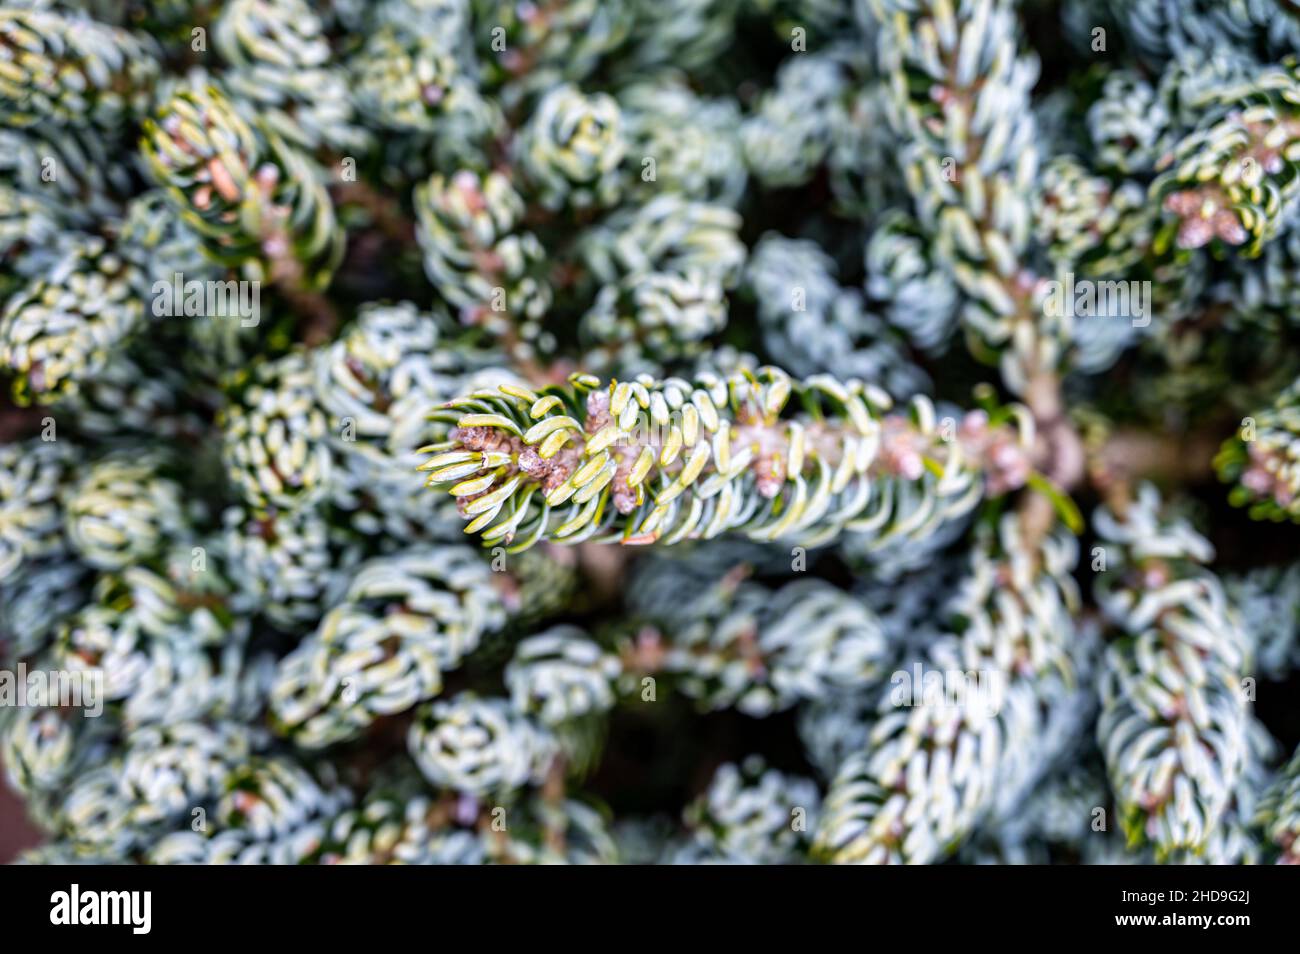 Botanical collection, young coniferous tree Abies koreana close up Stock Photo